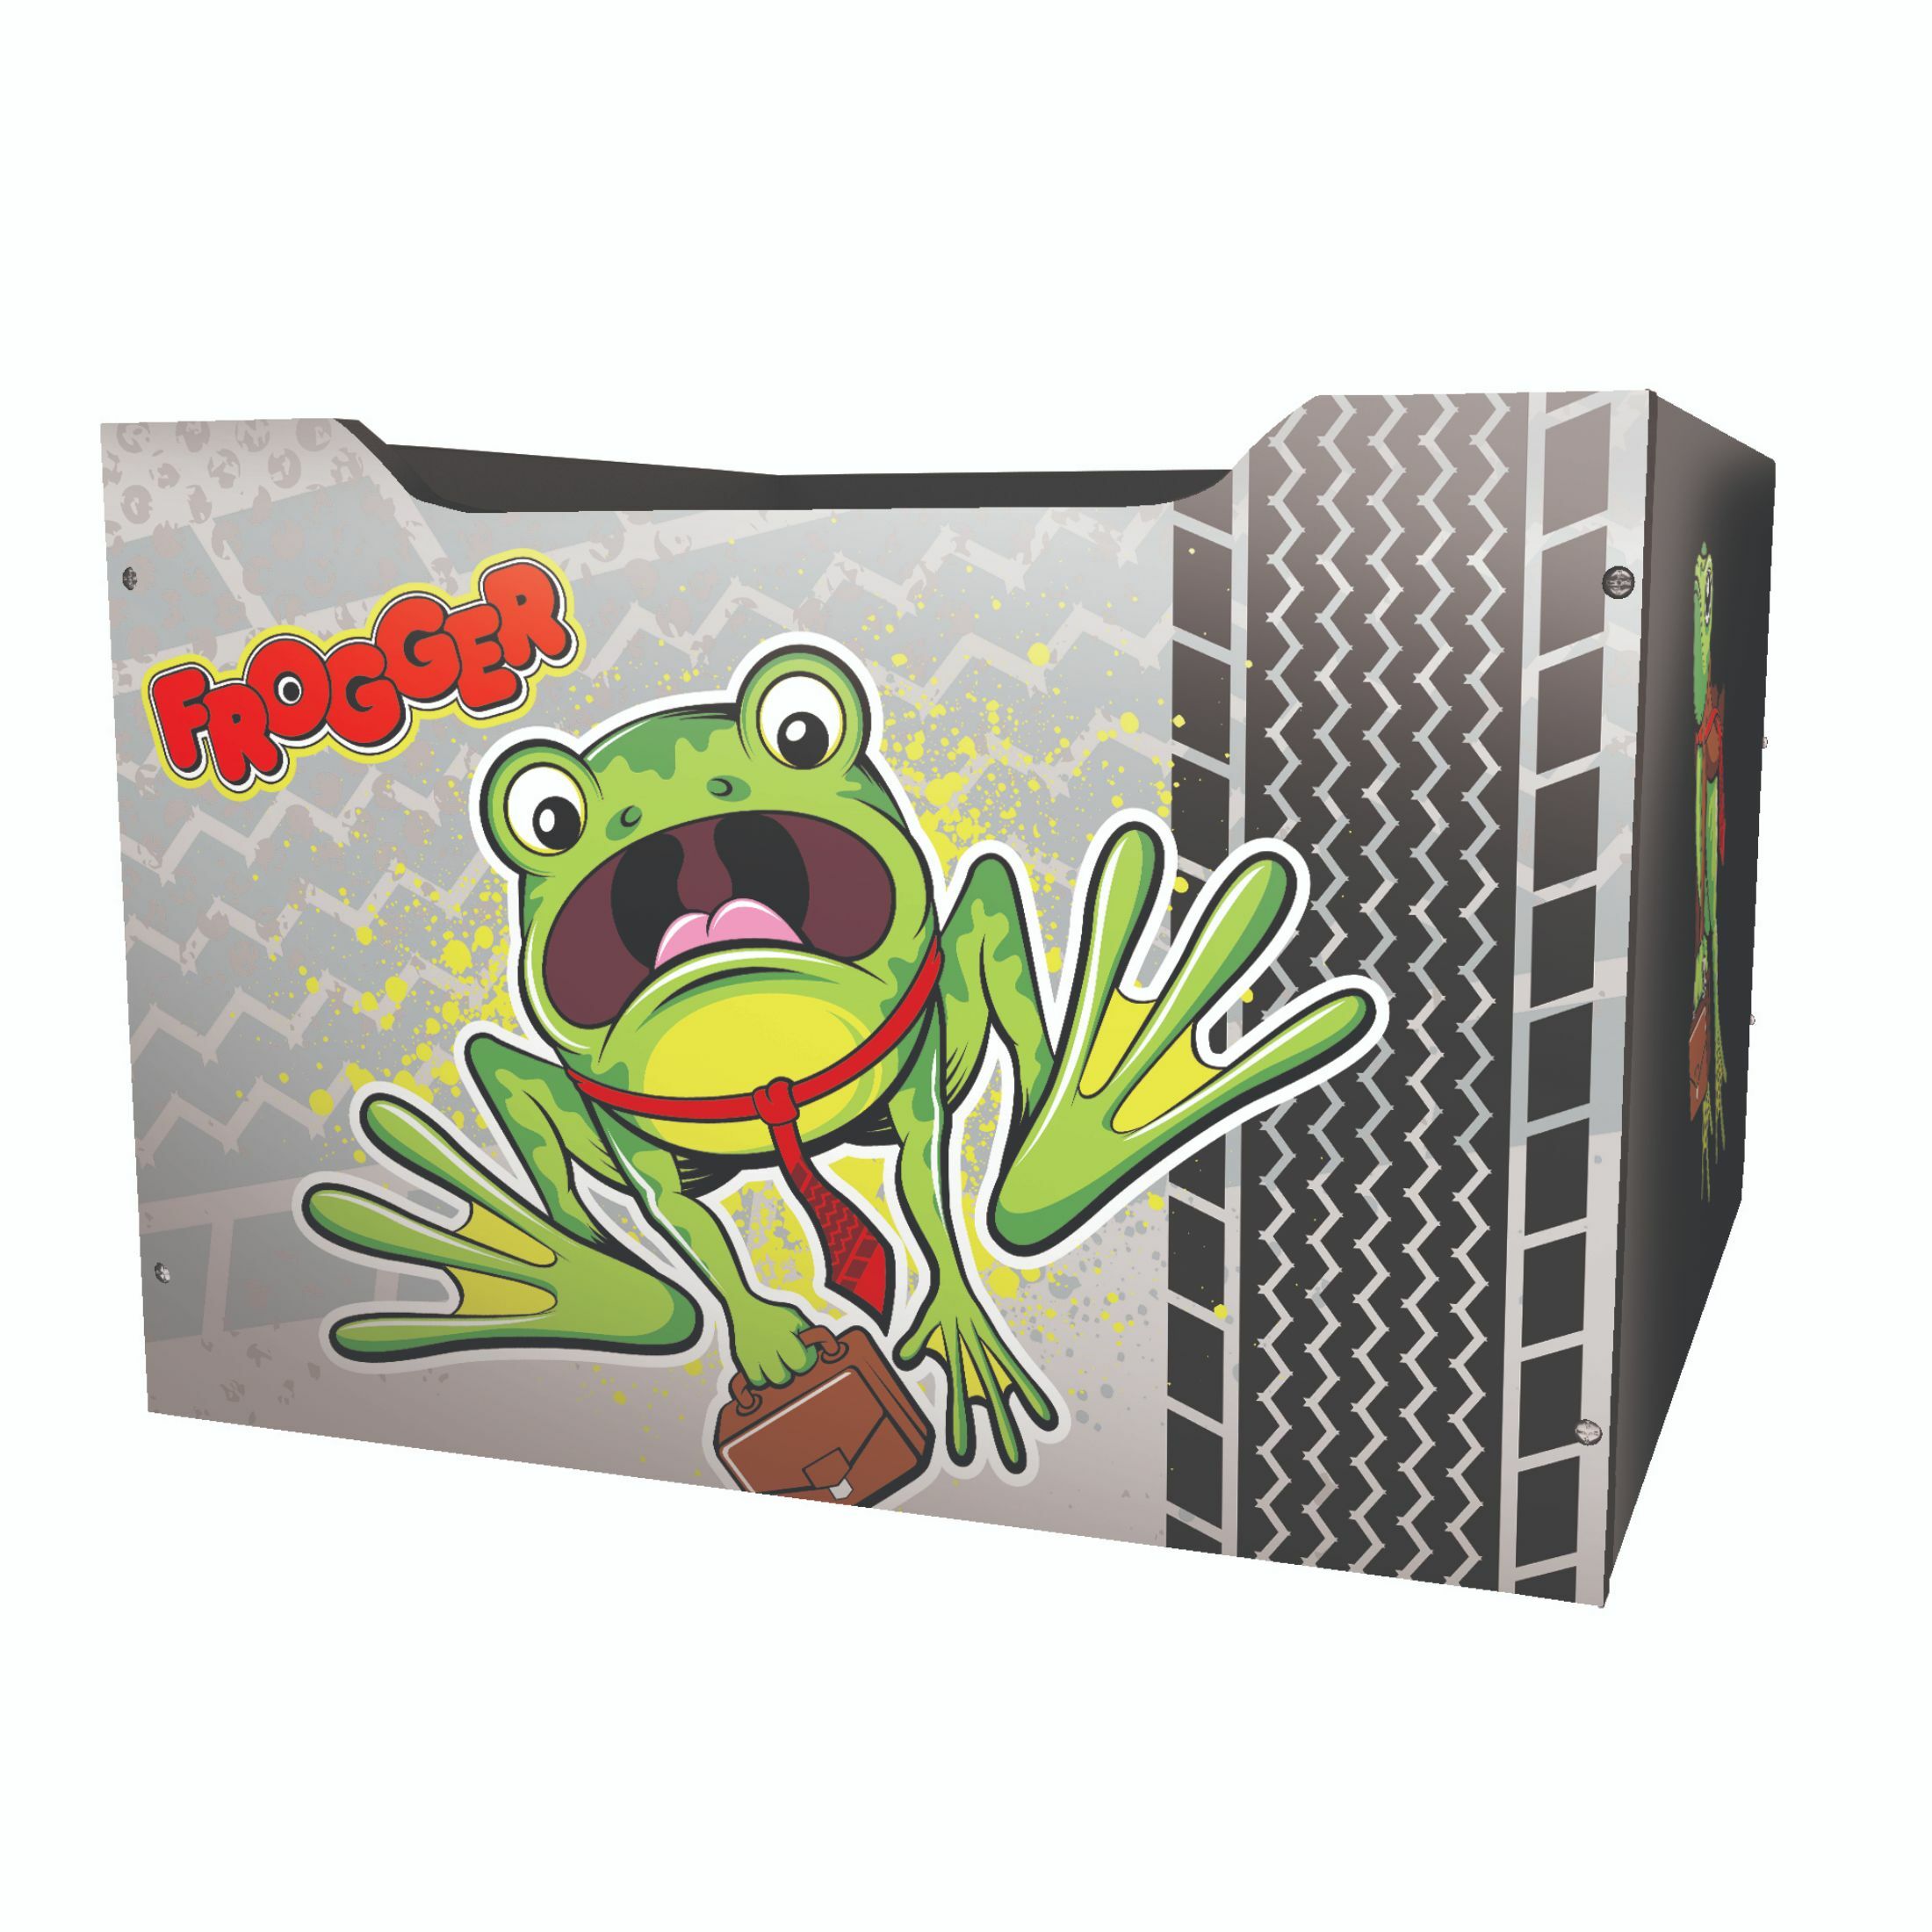 Arcade1Up Frogger At Home Arcade 3-in1 Games with Light Marquee and Licensed Riser - image 5 of 6